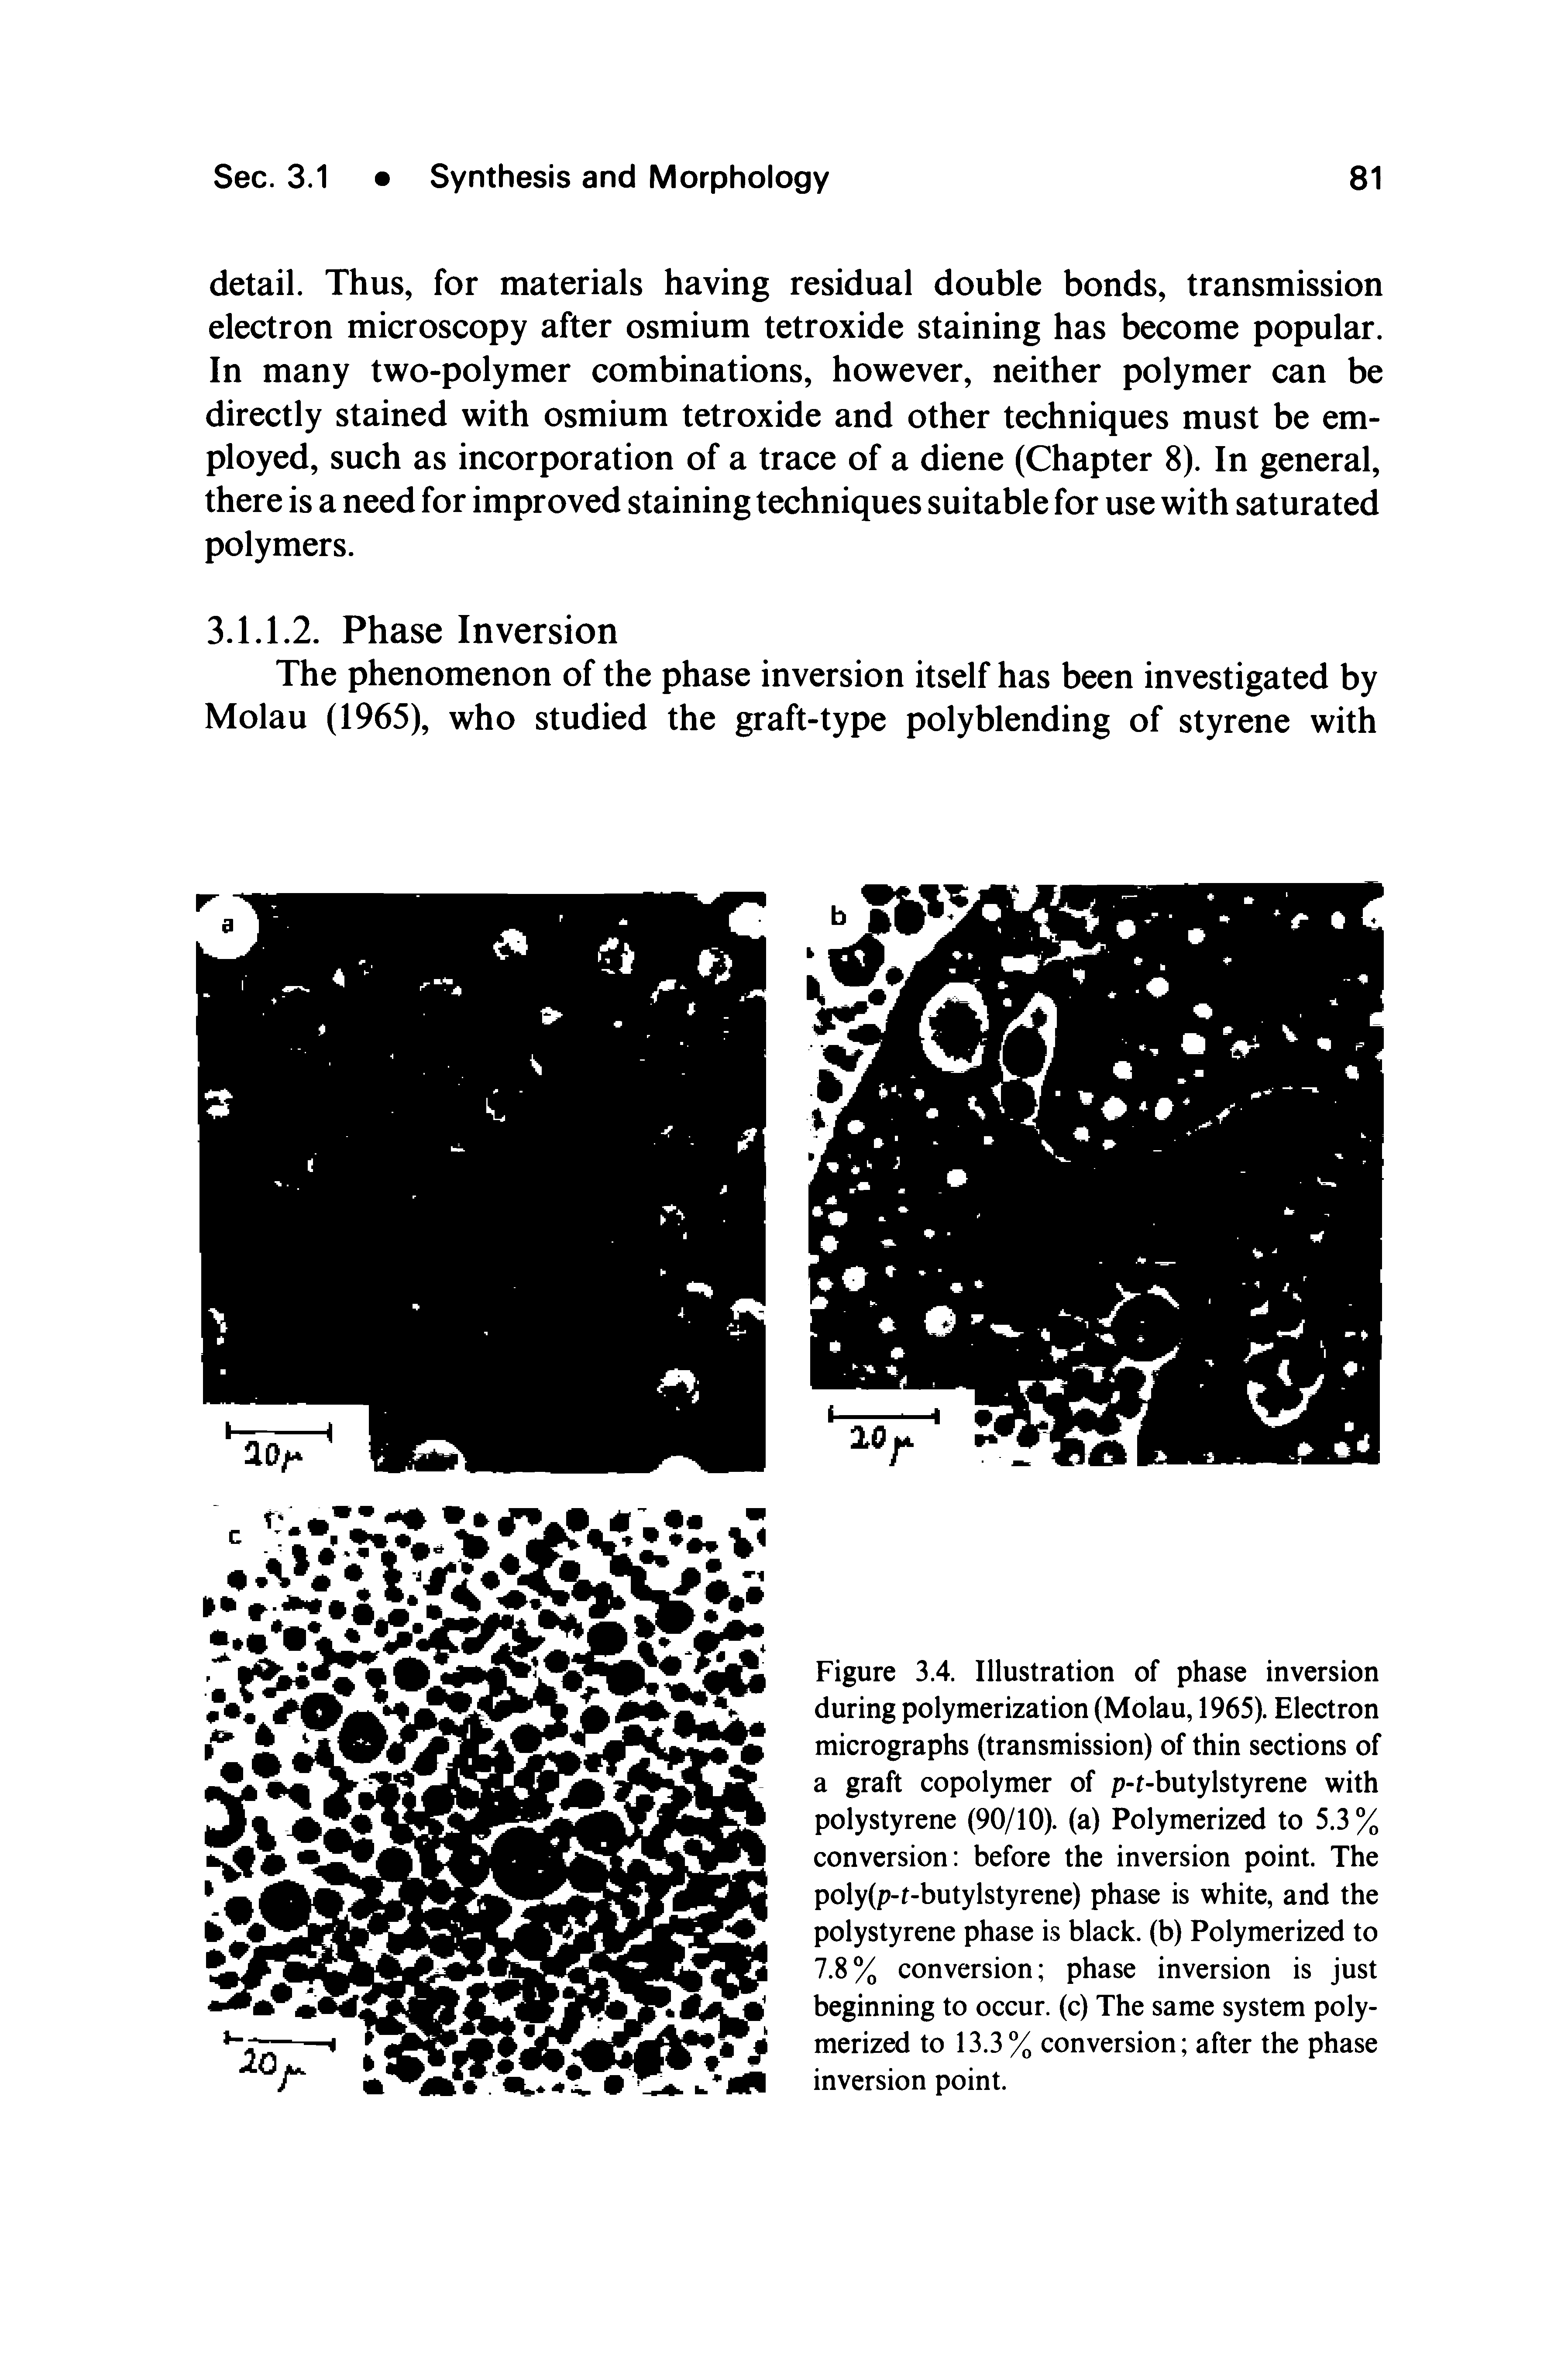 Figure 3.4. Illustration of phase inversion during polymerization (Molau, 1965). Electron micrographs (transmission) of thin sections of a graft copolymer of p-t-butylstyrene with polystyrene (90/10). (a) Polymerized to 5.3 % conversion before the inversion point. The poly(p-t-butylstyrene) phase is white, and the polystyrene phase is black, (b) Polymerized to 7.8% conversion phase inversion is just beginning to occur, (c) The same system polymerized to 13.3% conversion after the phase inversion point.